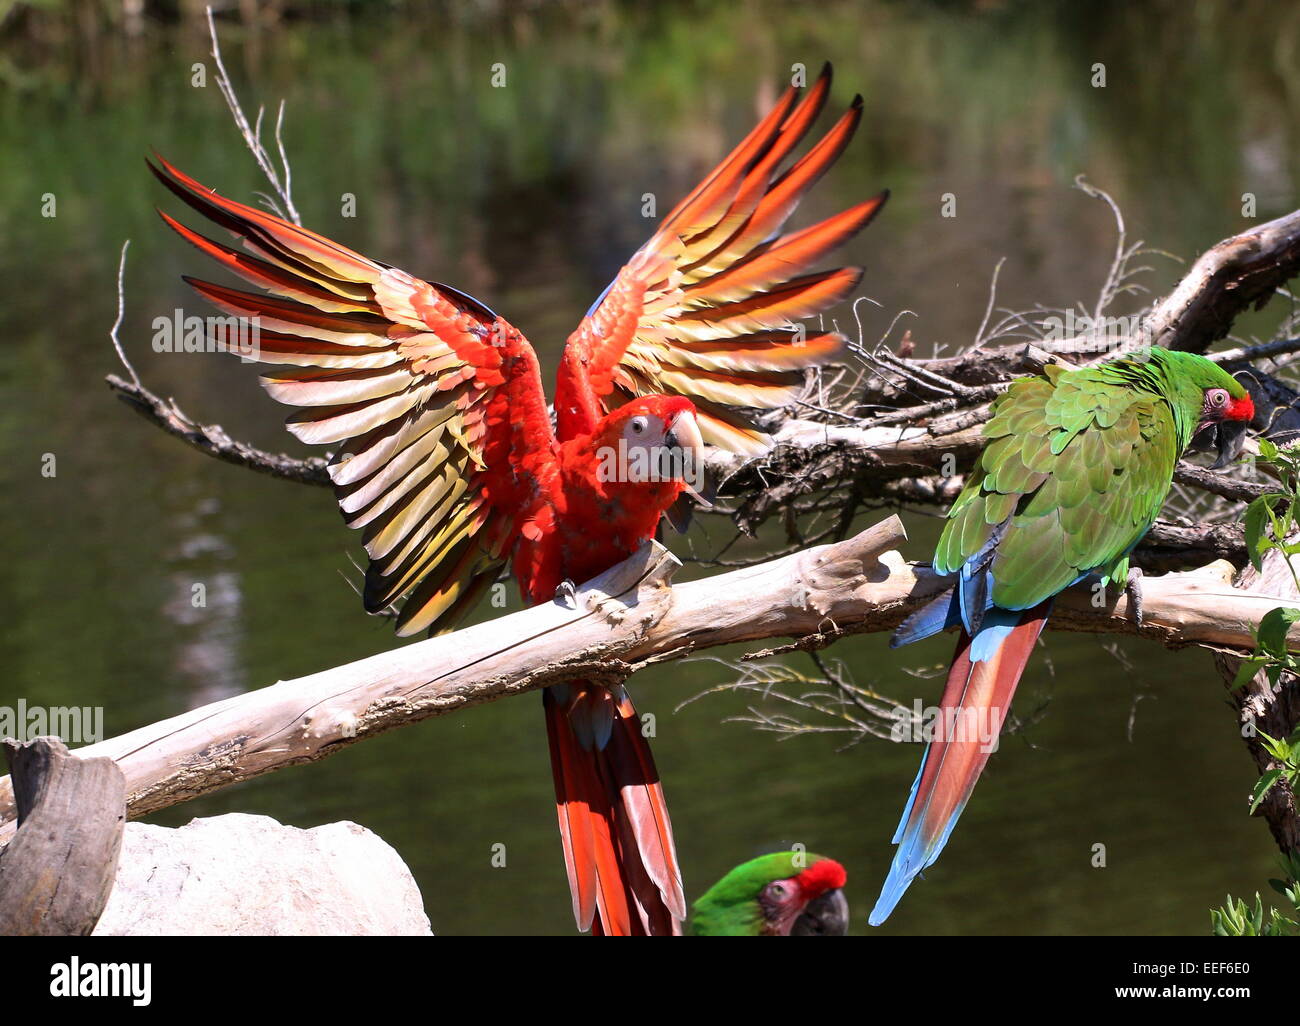 South American Scarlet macaw (Ara macao) with spread wings landing on a branch, a Military macaw (Ara militaris) already perched Stock Photo